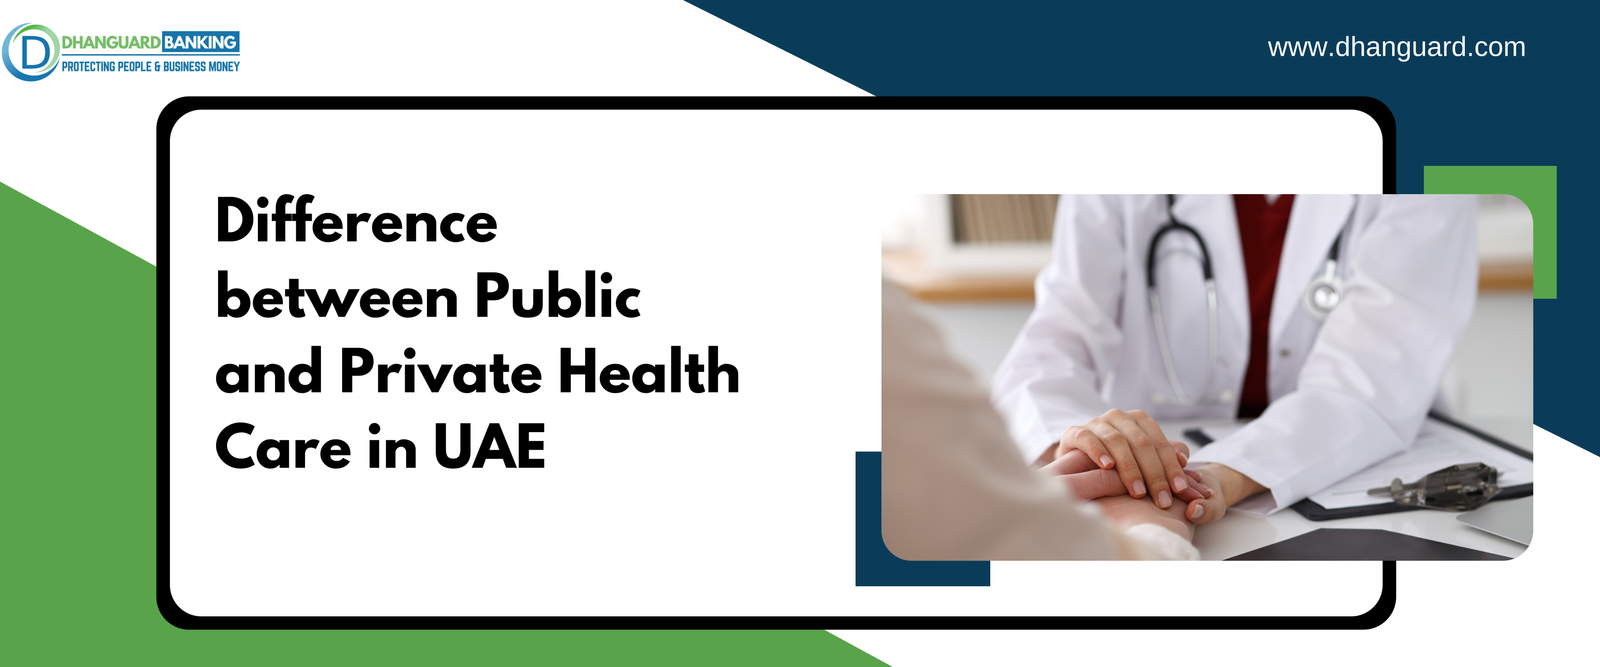 Difference between Public and Private Health care in UAE | Dhanguard